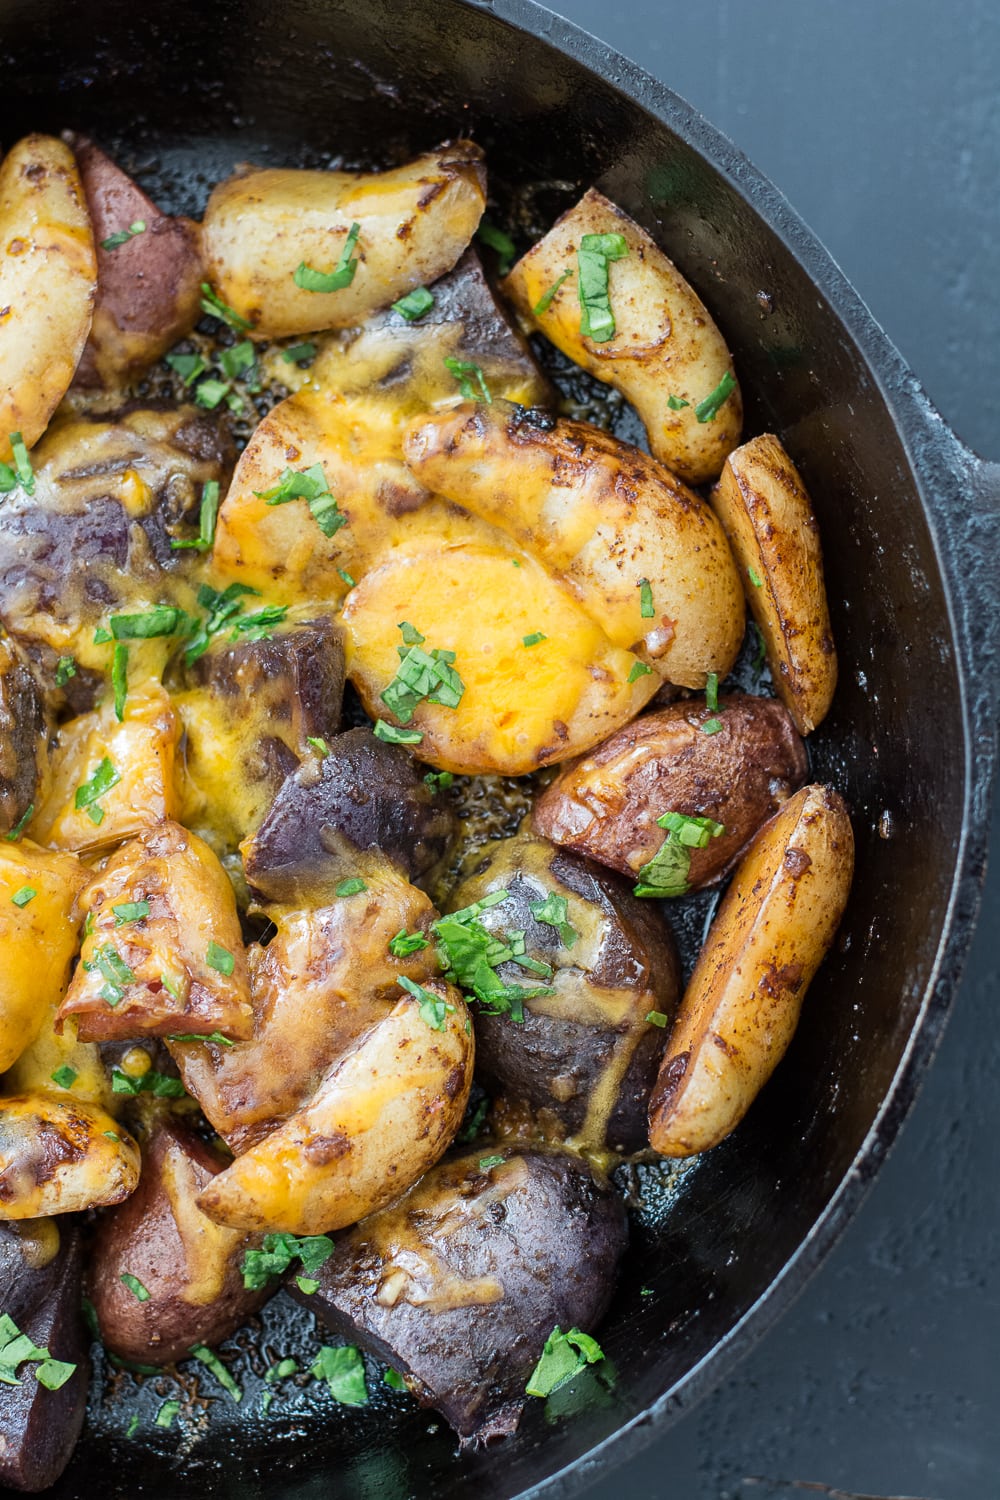 Quick and easy Pan Roasted Chipotle Fingerling Potatoes! This is the perfect sweet and spicy side dish to mix up your dinner routine!